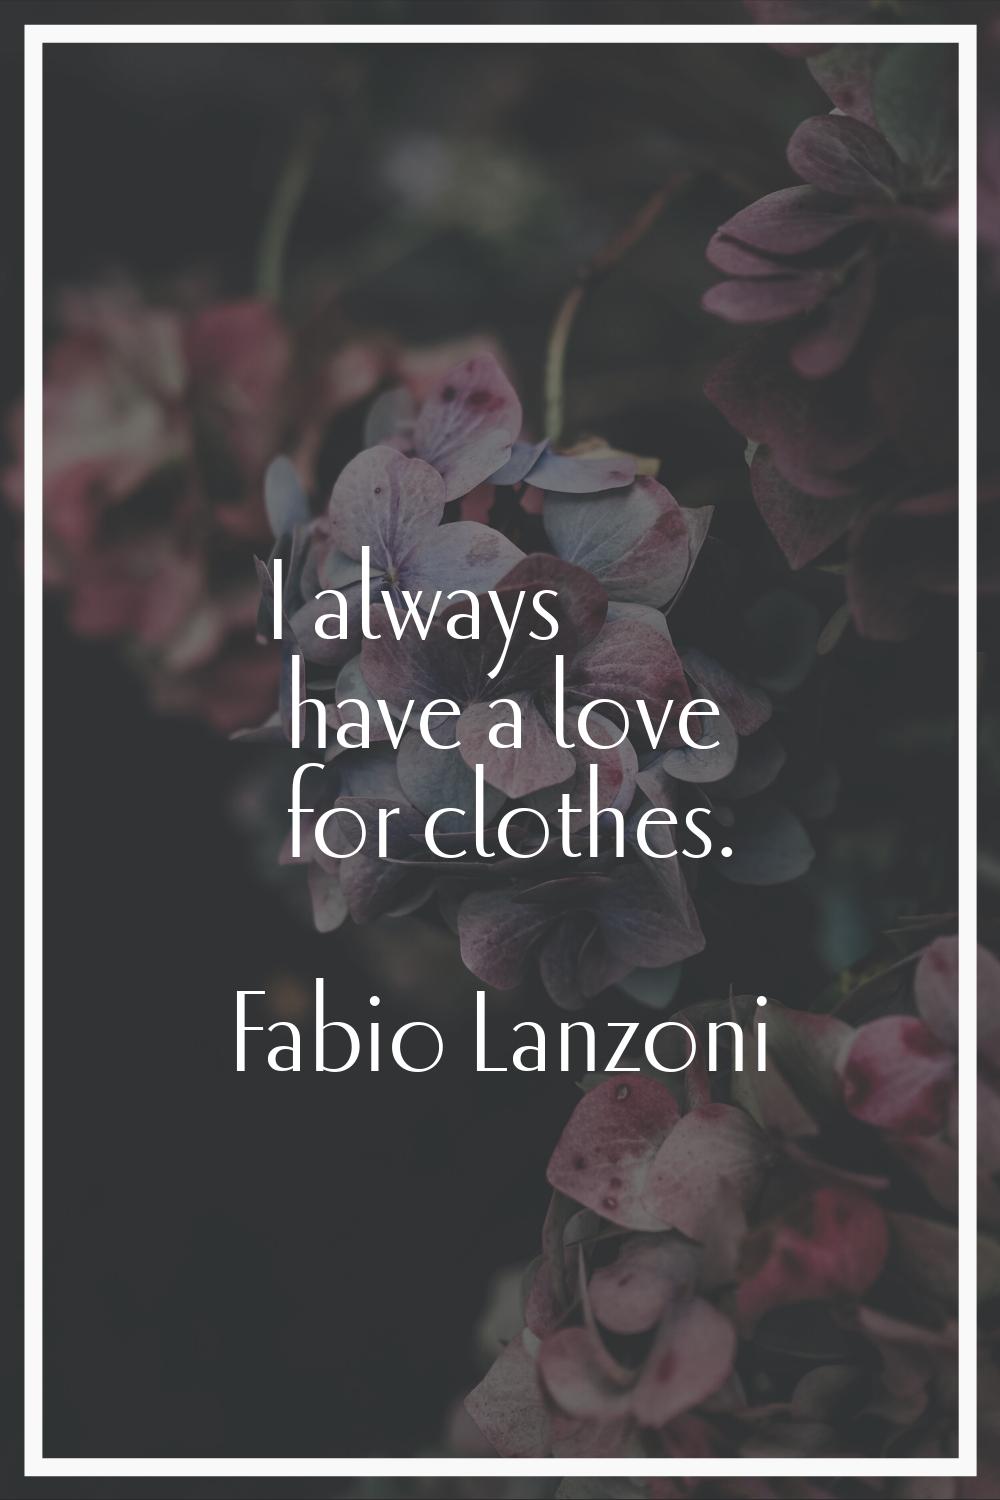 I always have a love for clothes.